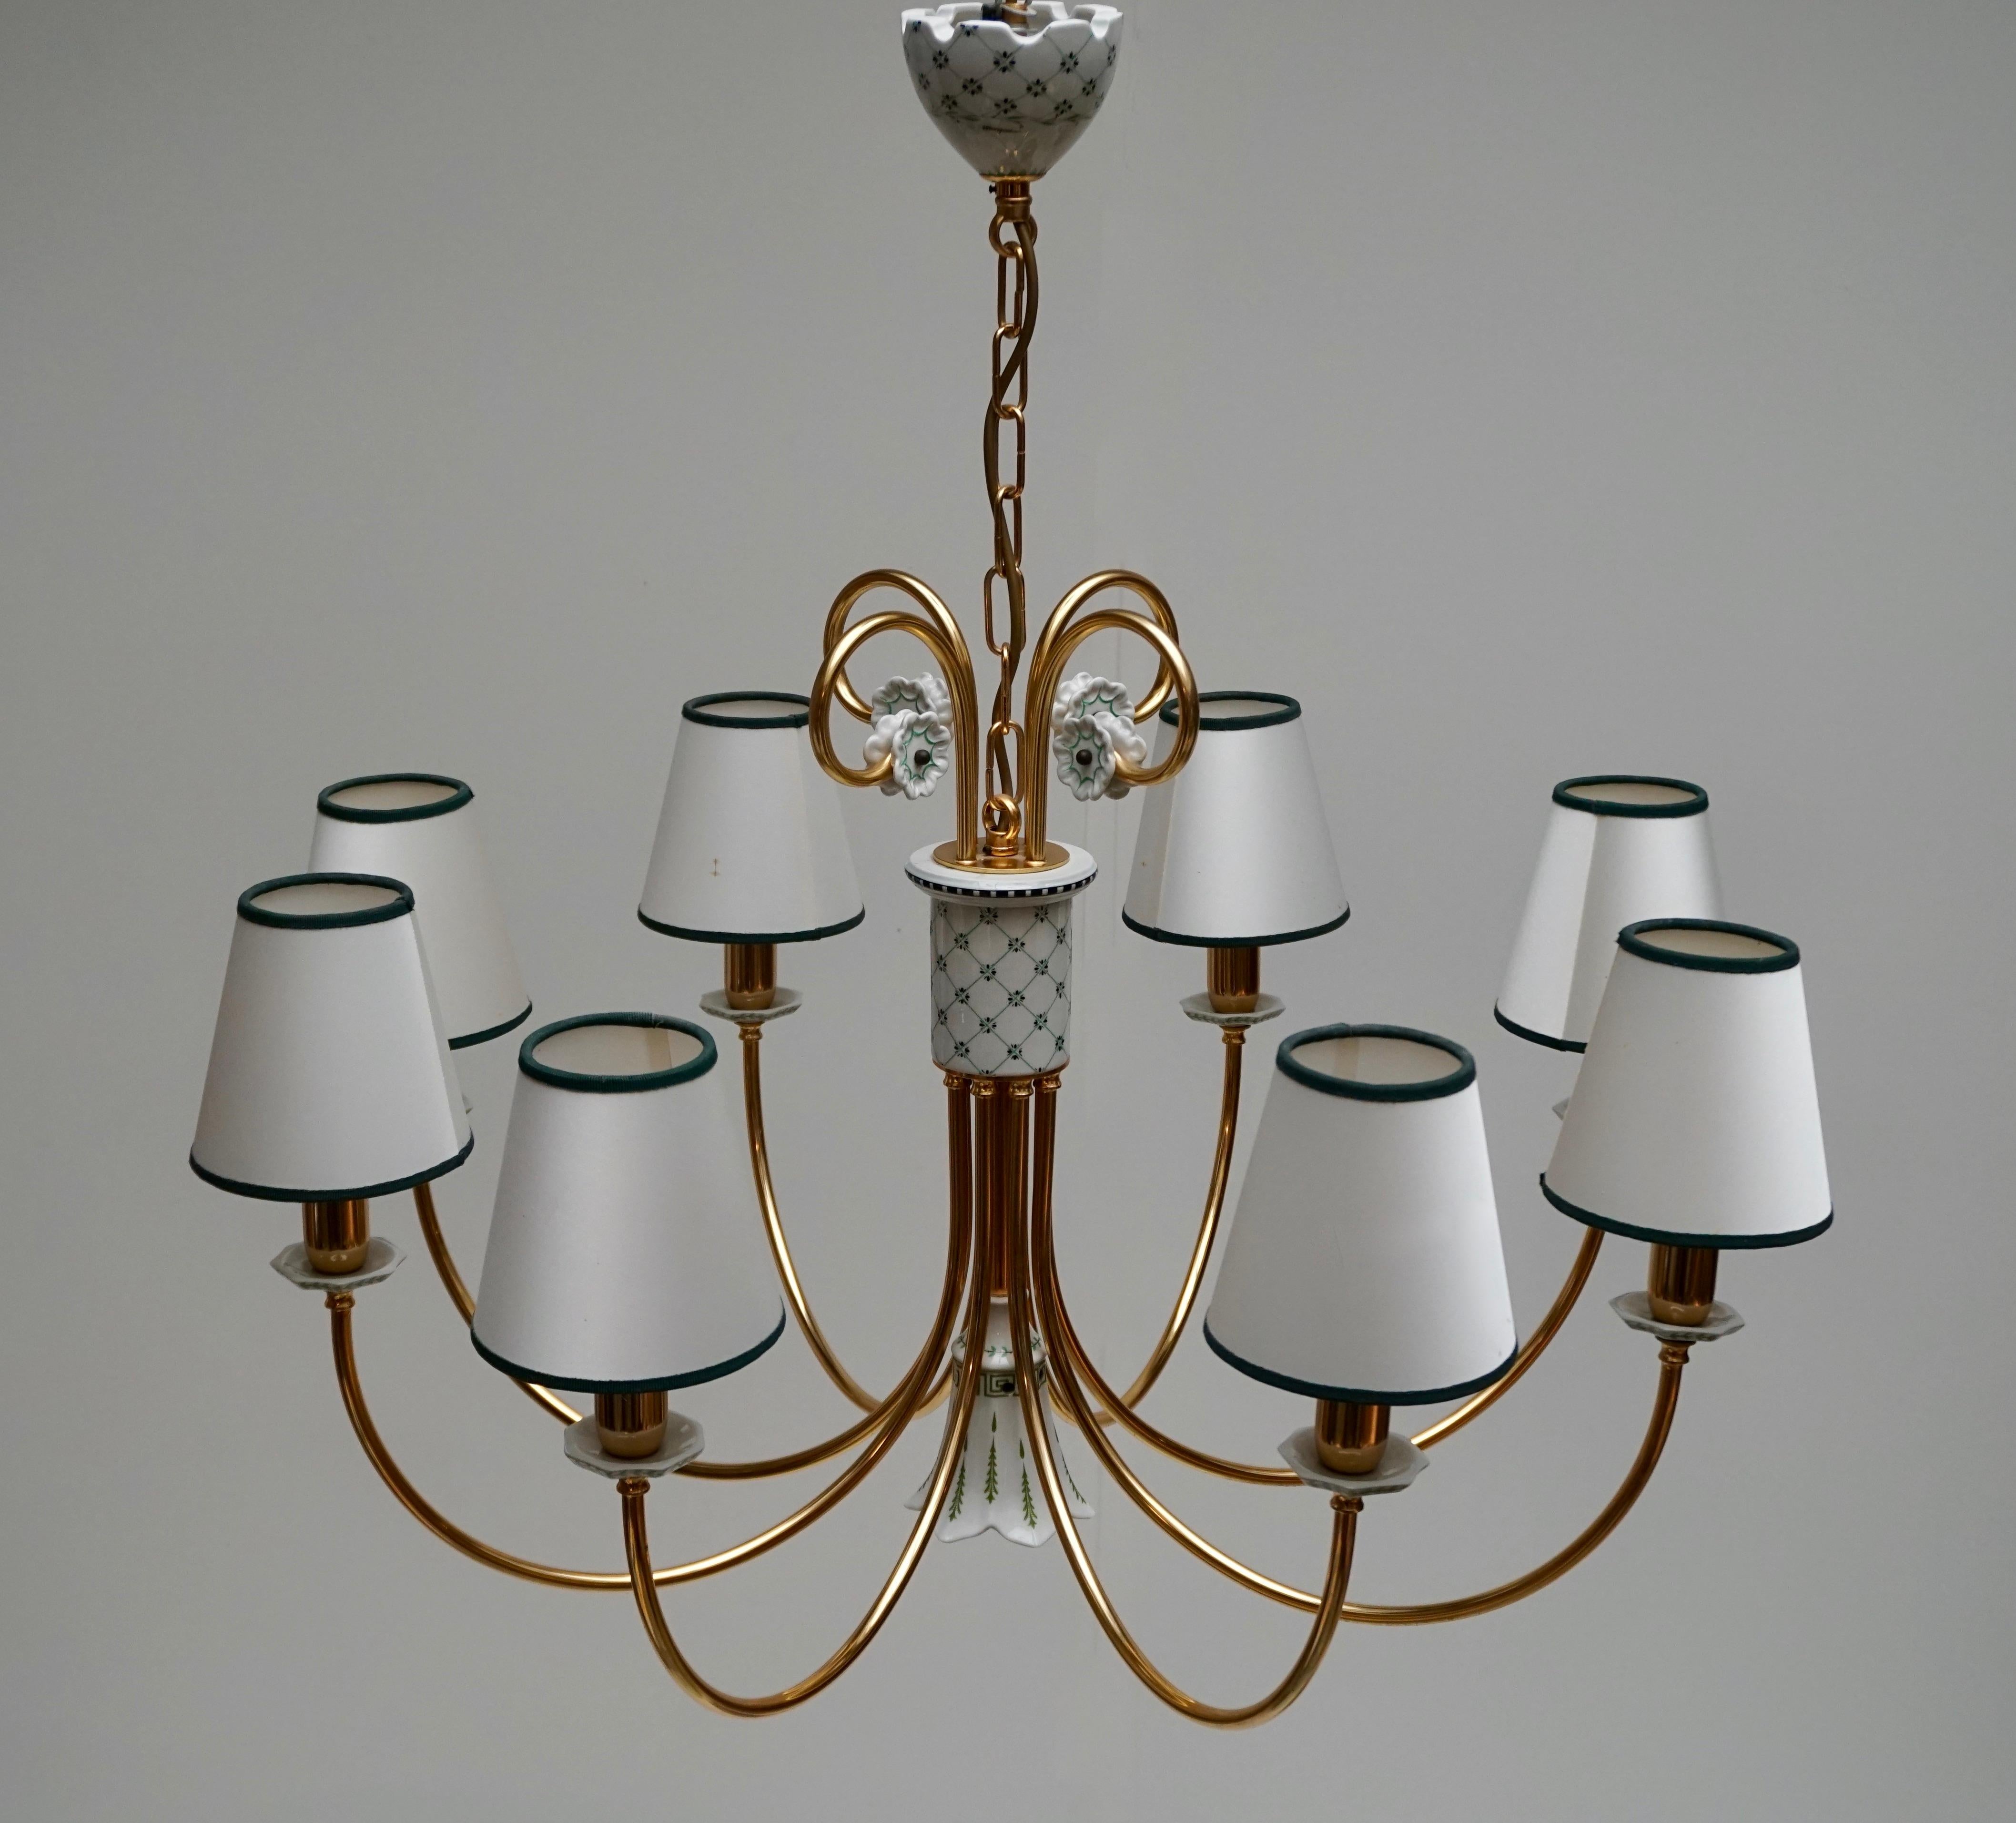 20th Century Giulia Mangani Porcelain Chandelier Italy Florence For Sale